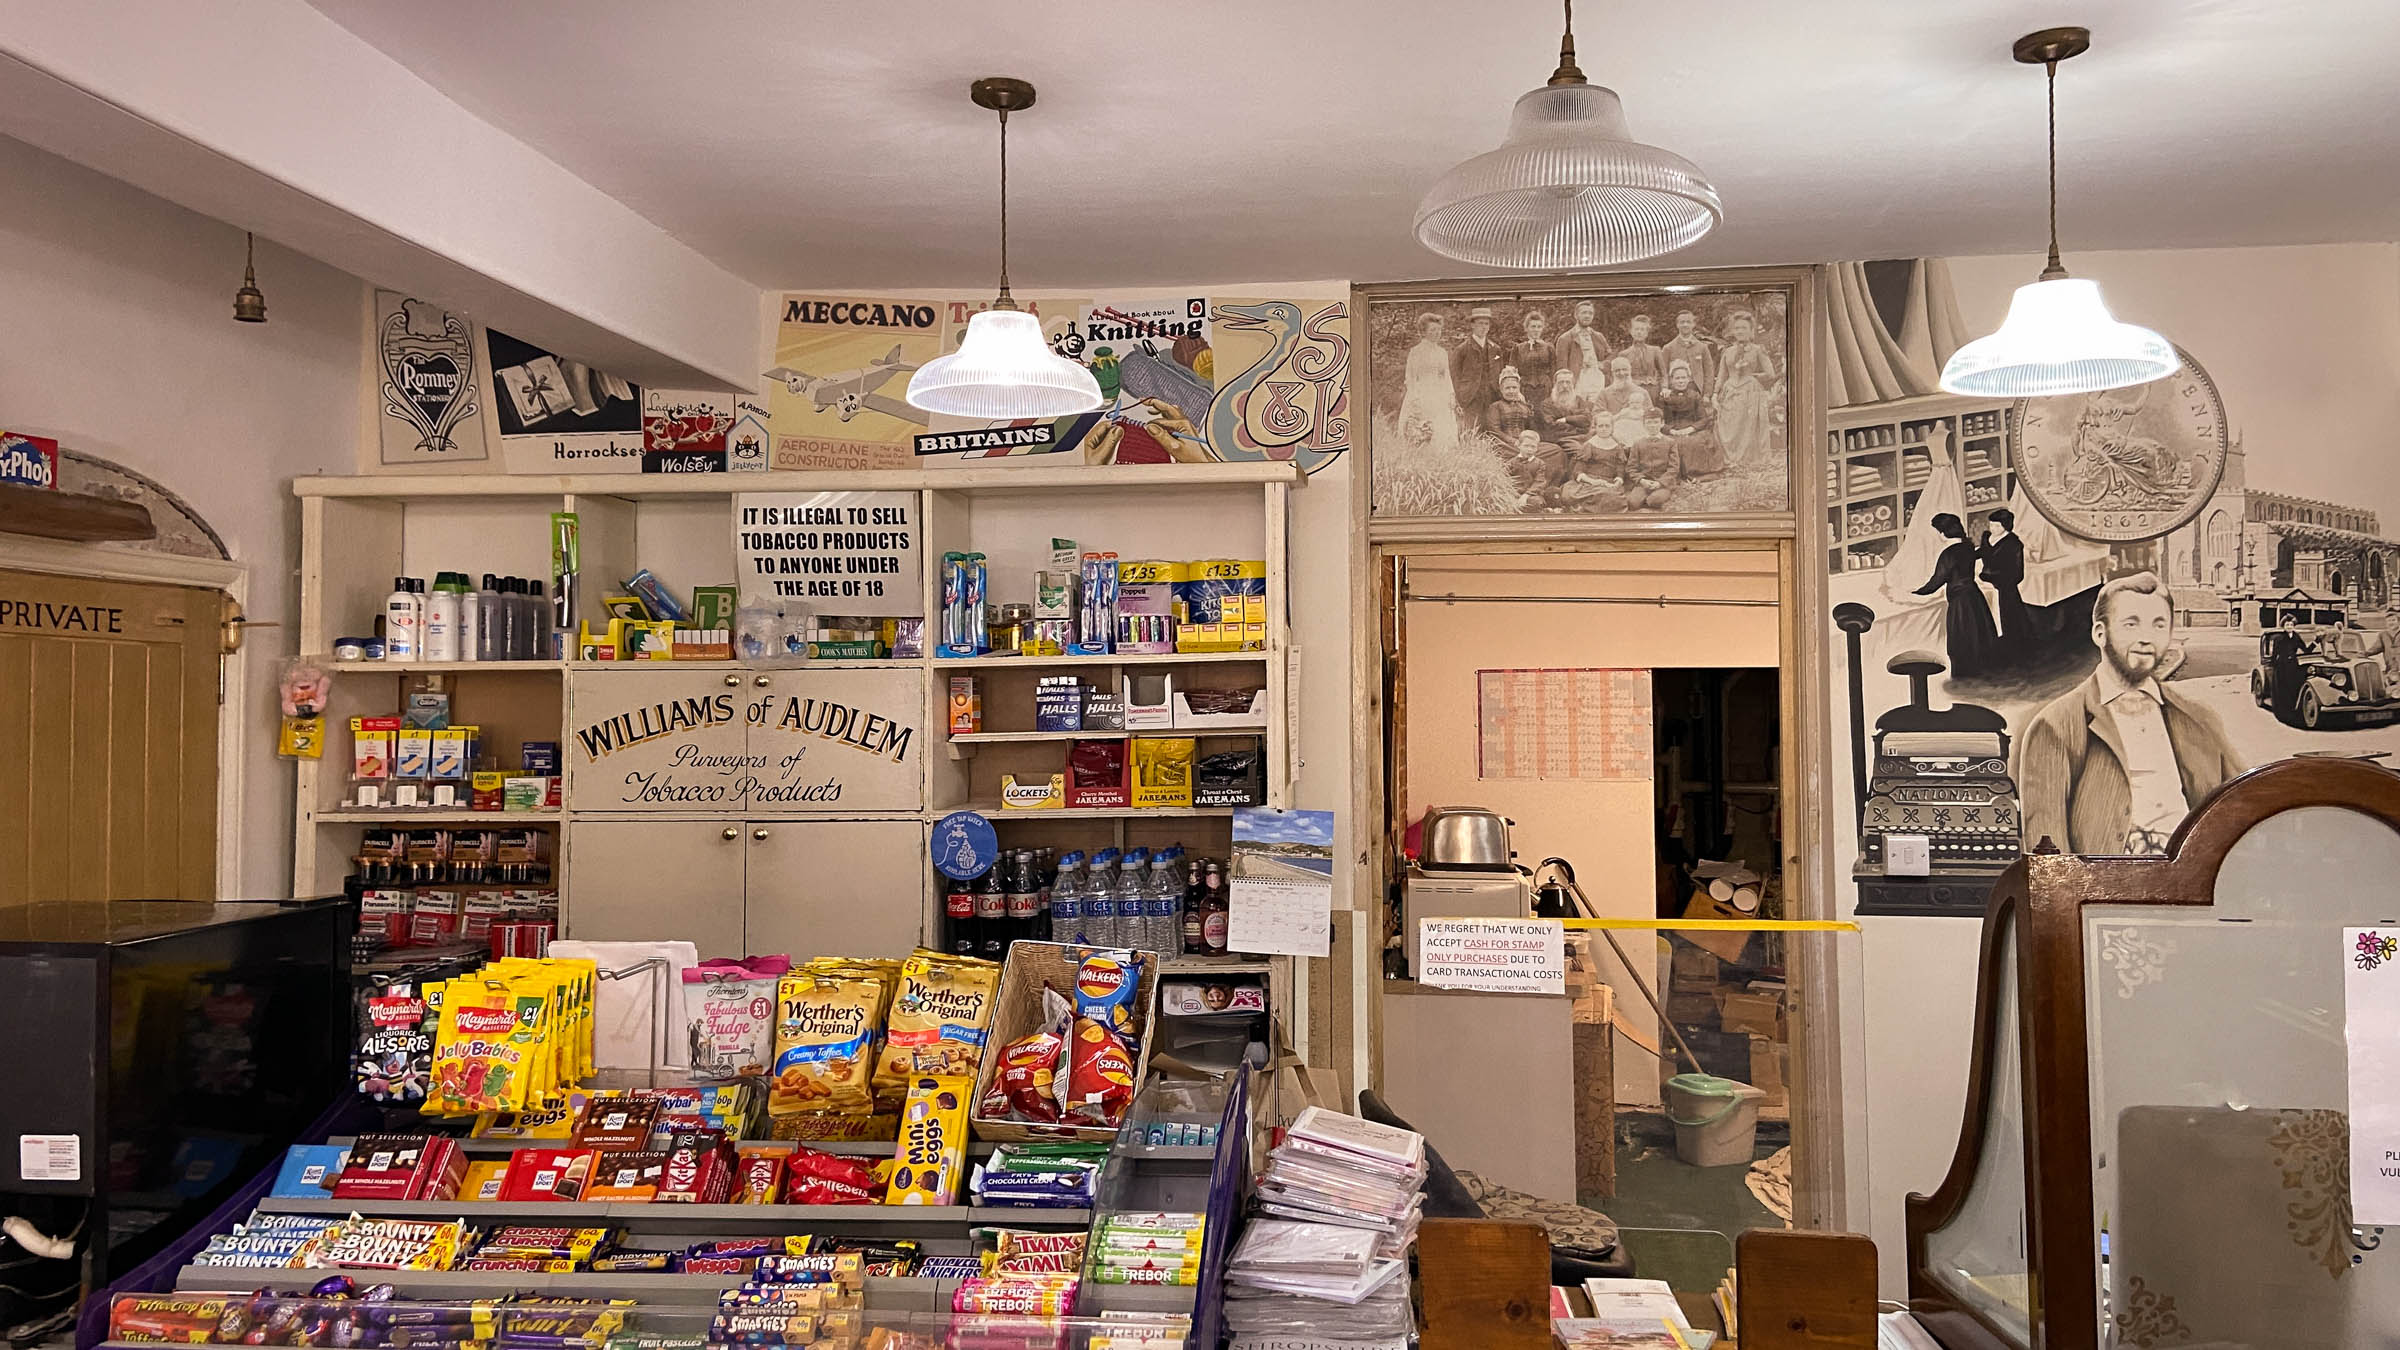 Shows the positioning of the mural on the right, and the old brands painted on above the shelving left.